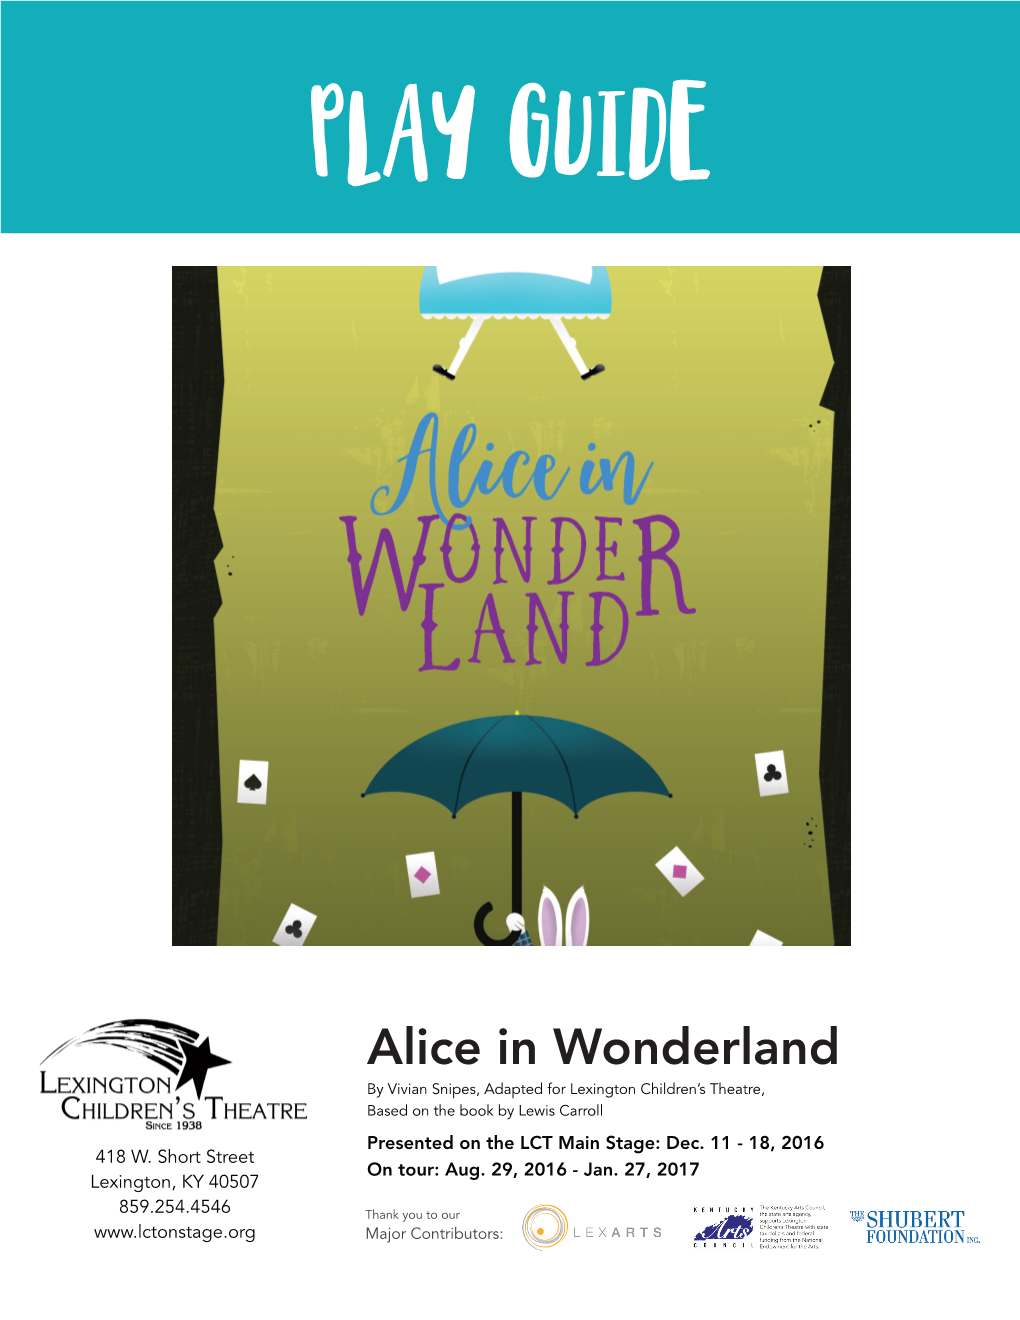 Alice in Wonderland by Vivian Snipes, Adapted for Lexington Children’S Theatre, Based on the Book by Lewis Carroll Presented on the LCT Main Stage: Dec